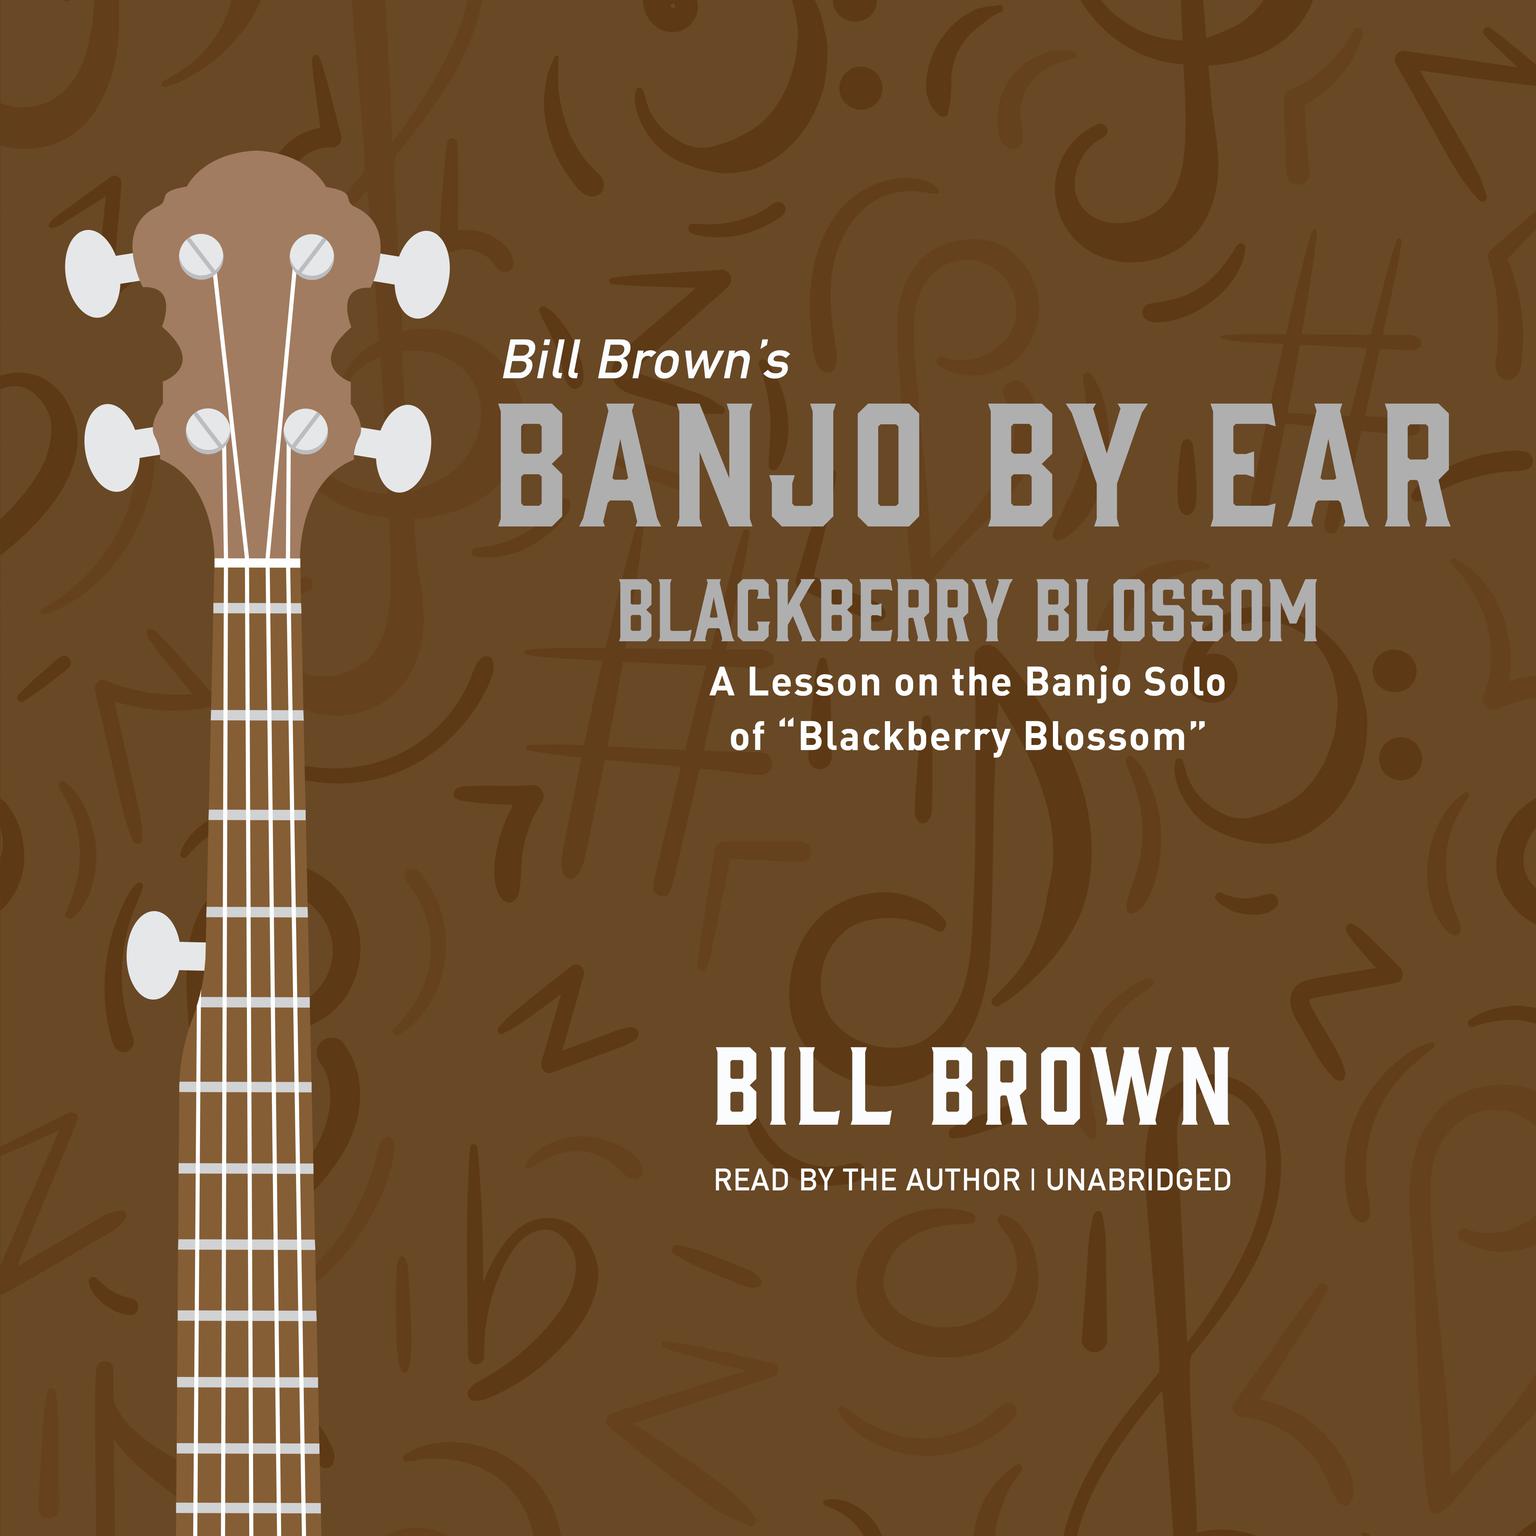 Blackberry Blossom: A Lesson on the Banjo Solo of “Blackberry Blossom”  Audiobook, by Bill Brown